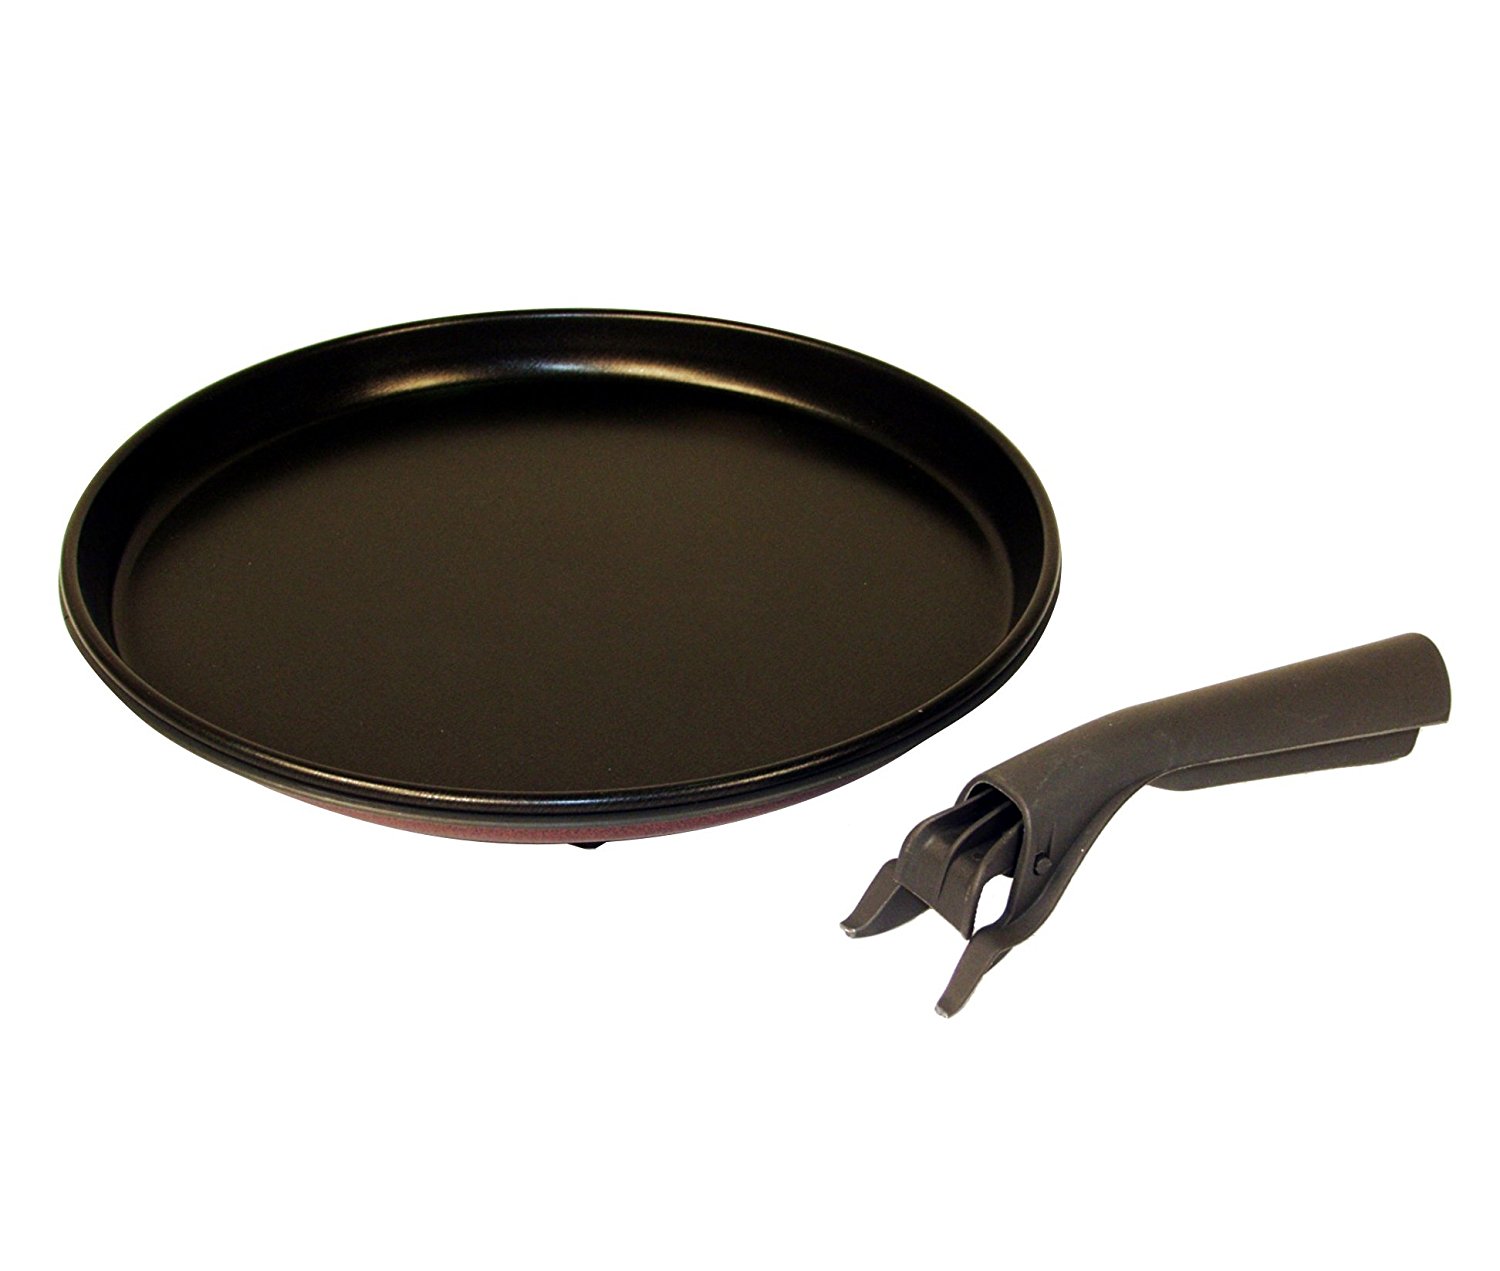 Keep It Crispy with the Microwave Pizza Pan